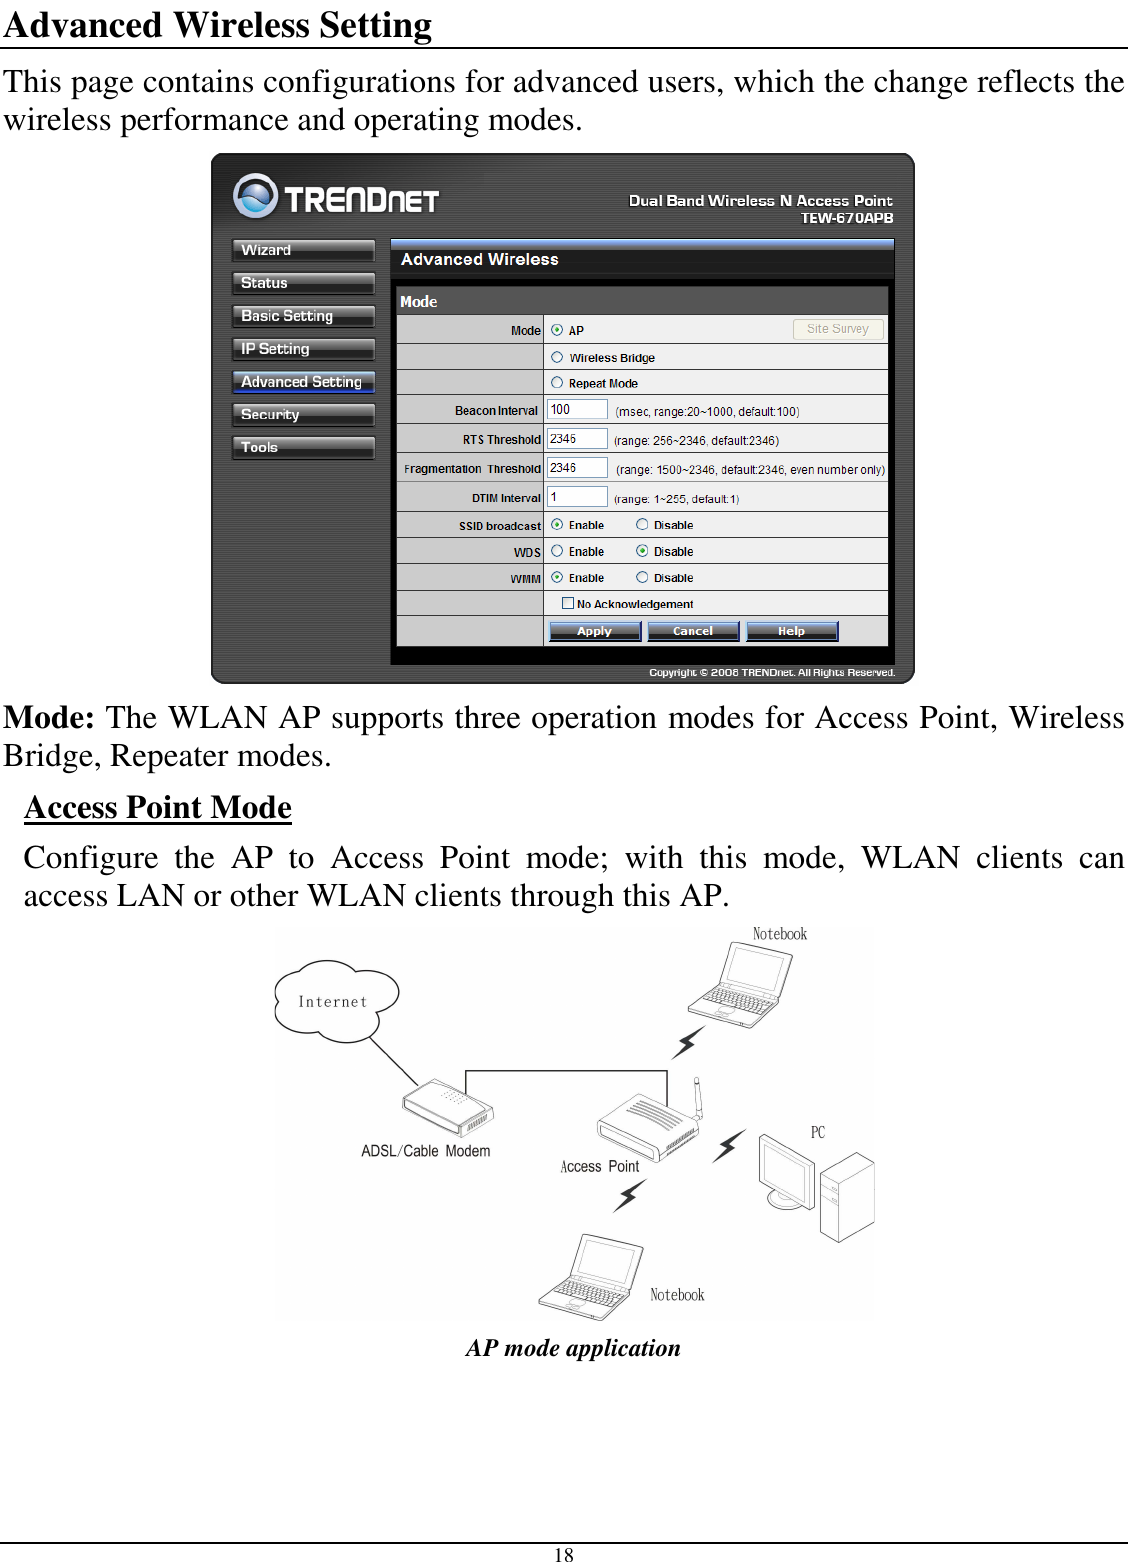  18 Advanced Wireless Setting This page contains configurations for advanced users, which the change reflects the wireless performance and operating modes.  Mode: The WLAN AP supports three operation modes for Access Point, Wireless Bridge, Repeater modes. Access Point Mode Configure  the  AP  to  Access  Point  mode;  with  this  mode,  WLAN  clients  can access LAN or other WLAN clients through this AP.  AP mode application 